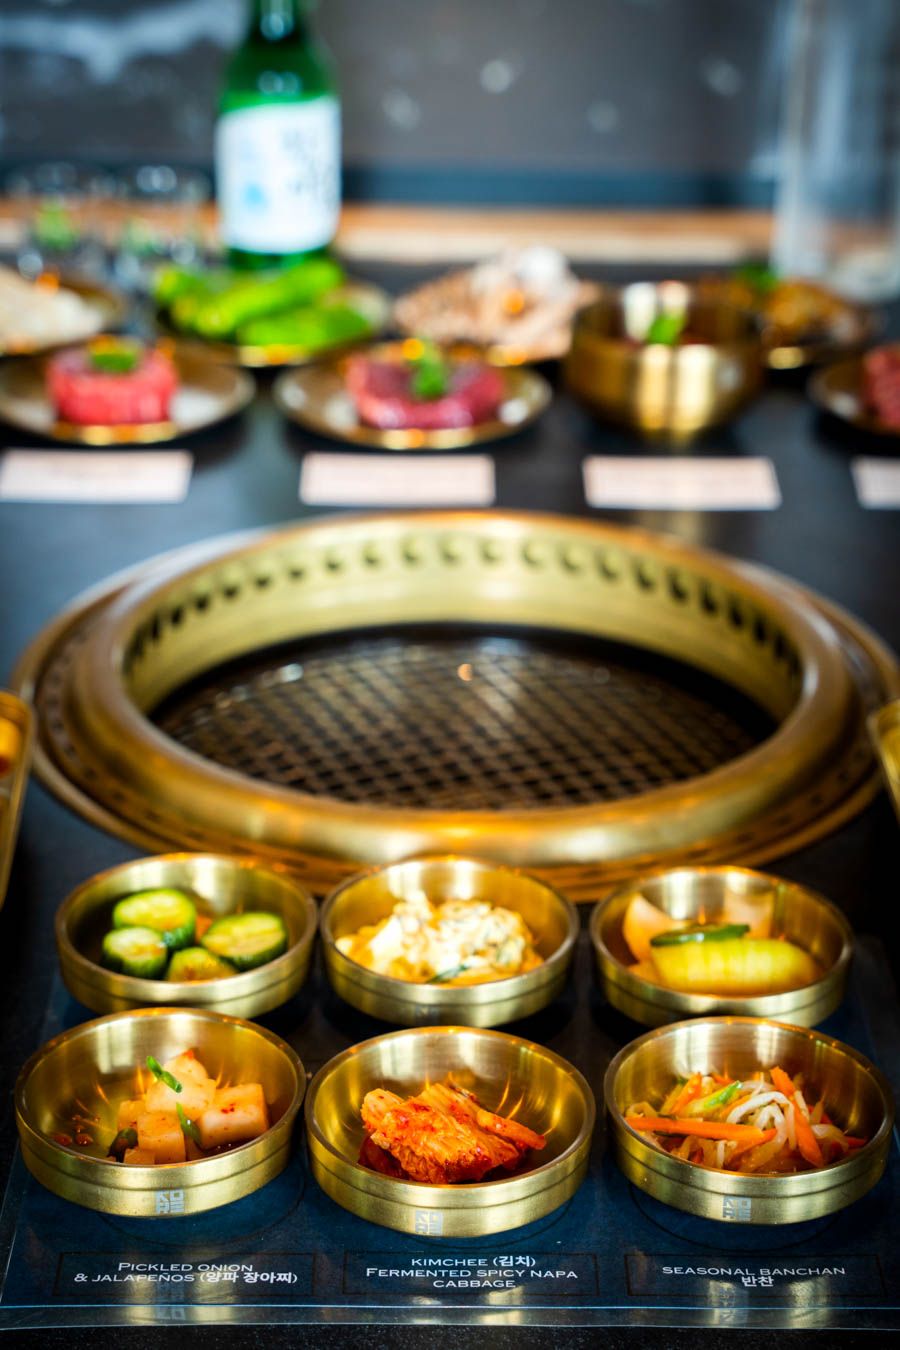 While the combination of meats and banchan heightens the communal motif, a large menu of more traditional, sizable cuts of meat are available to grill at the table too.